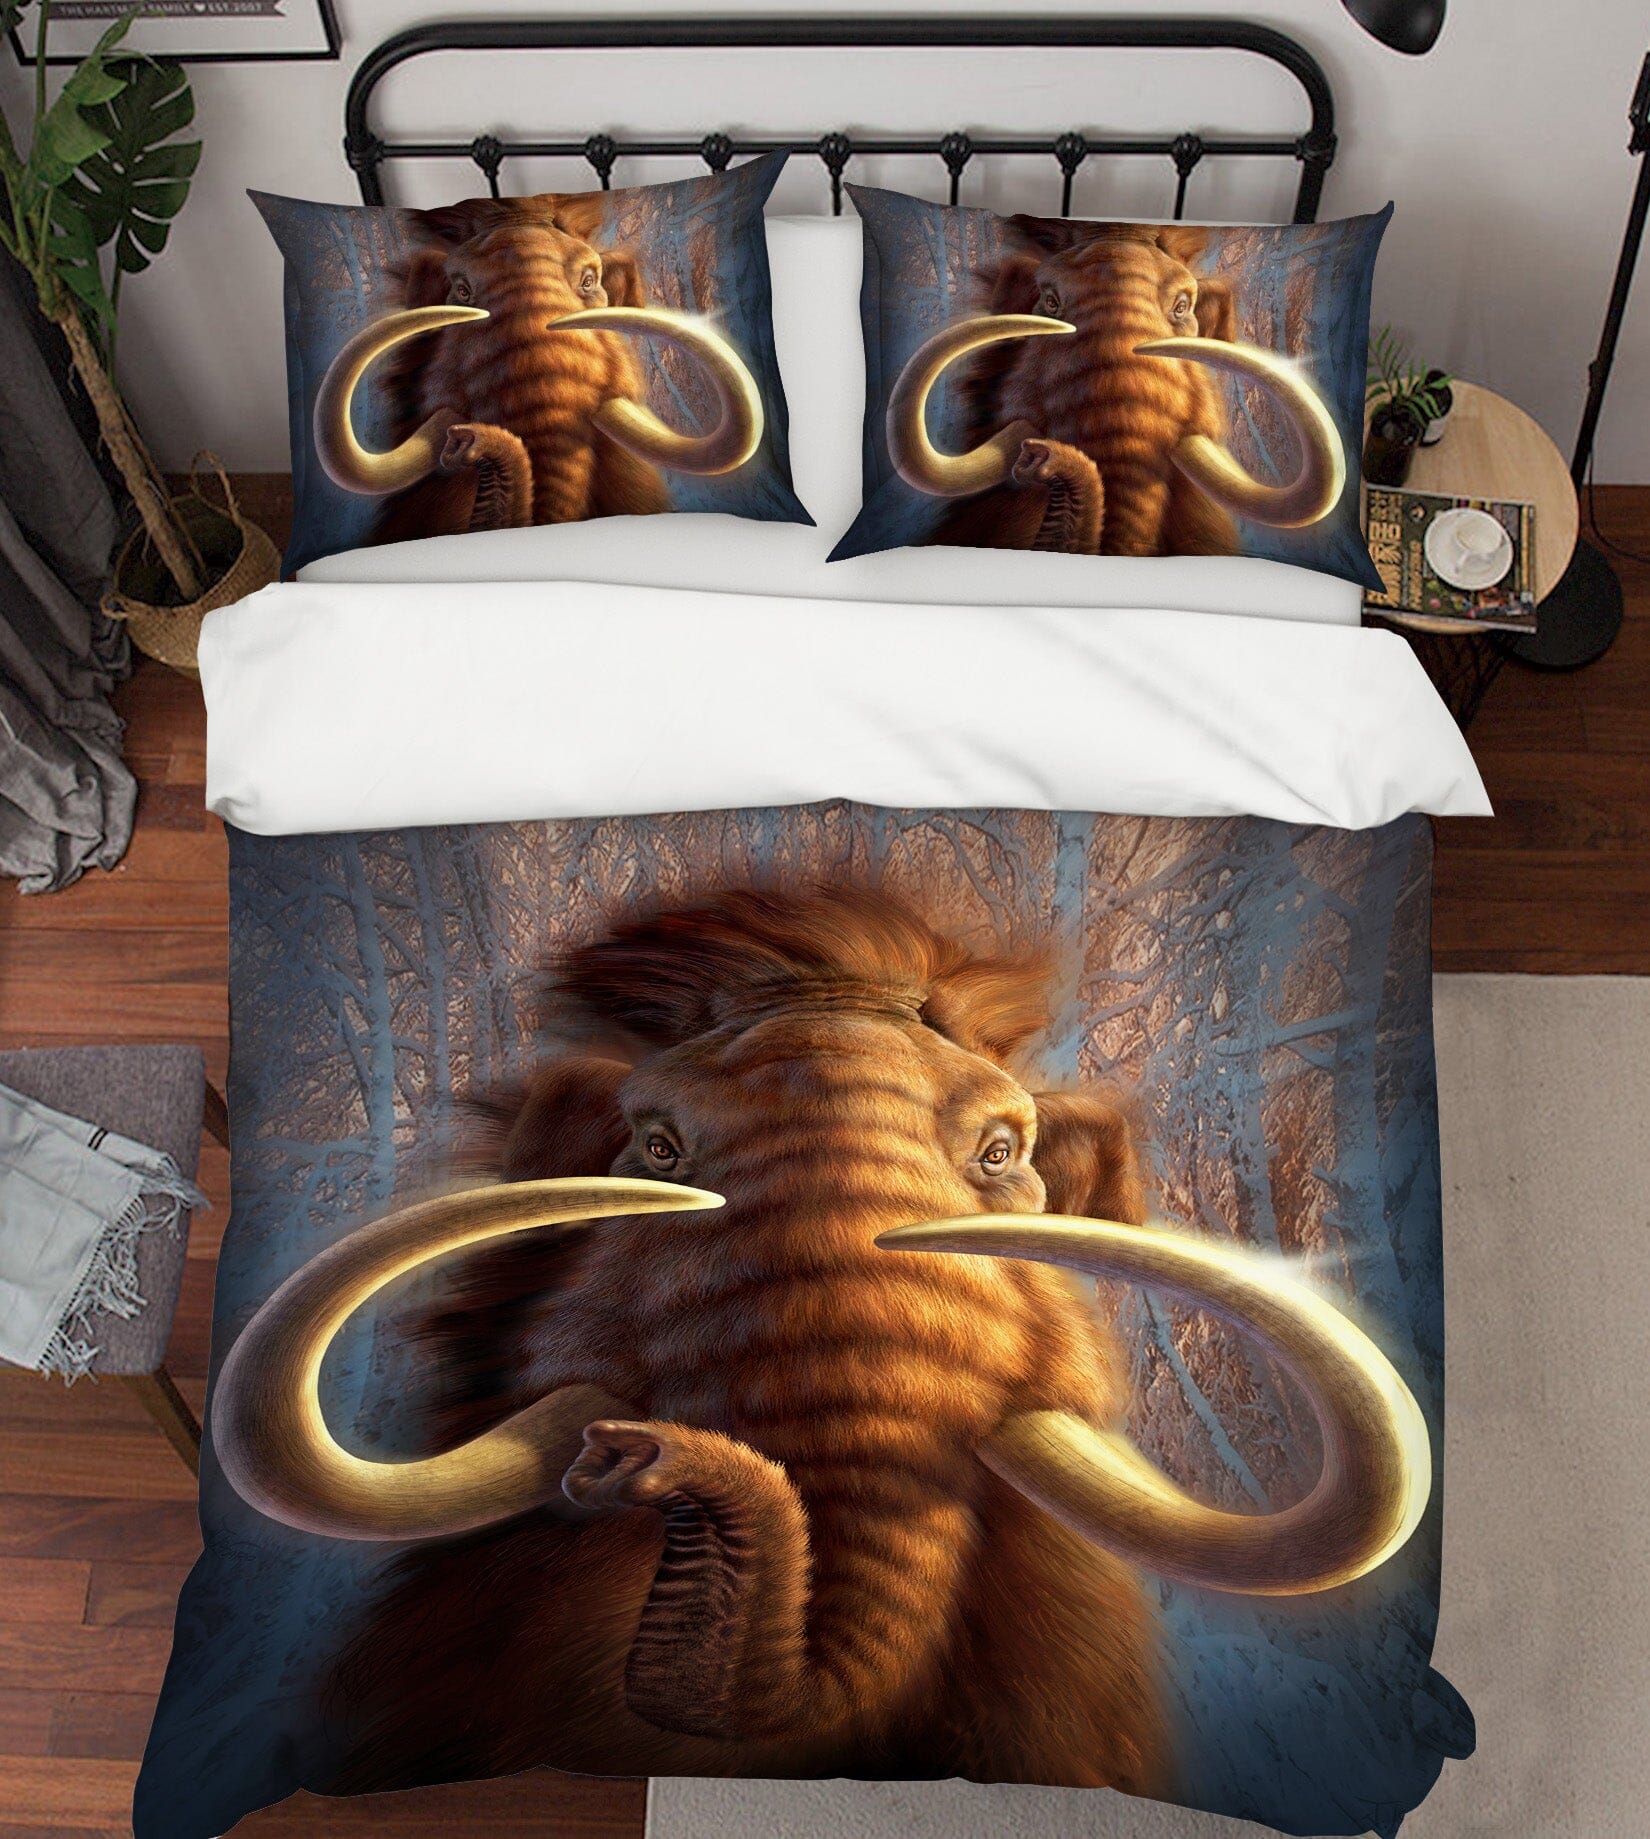 3D Mammoth 2127 Jerry LoFaro bedding Bed Pillowcases Quilt Quiet Covers AJ Creativity Home 